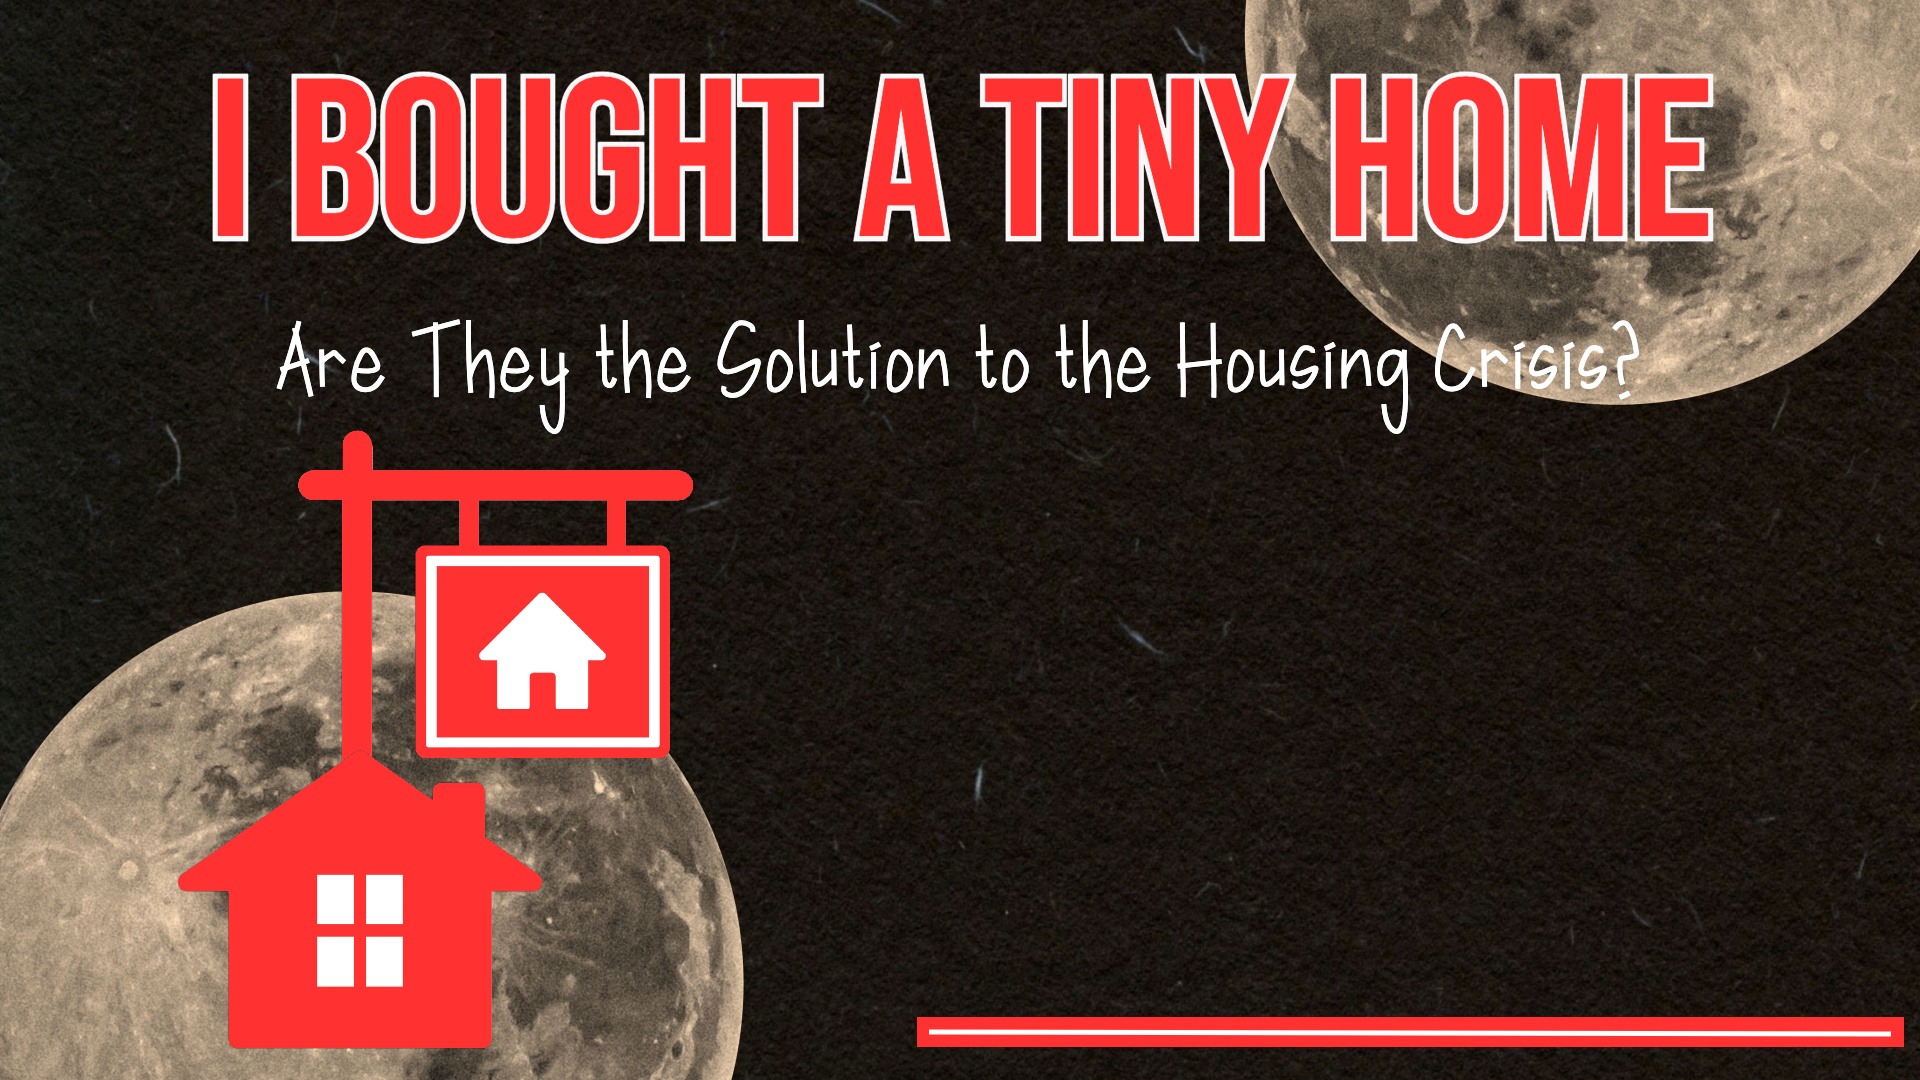 I Bought a Tiny Home: Are They the Solution to the Housing Crisis?